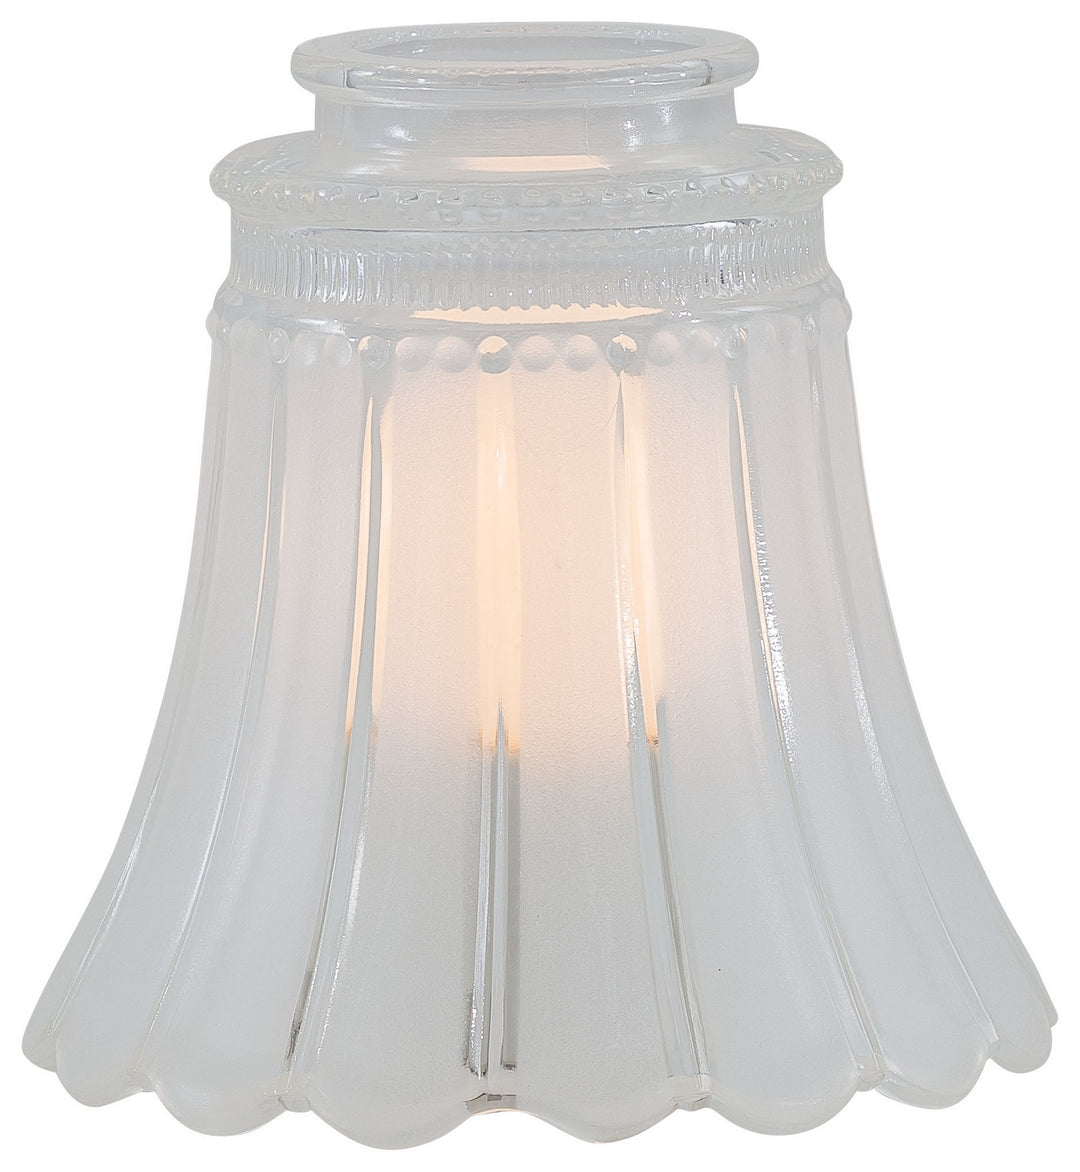 2 1/4" Glass Shade in Frosted/Clear